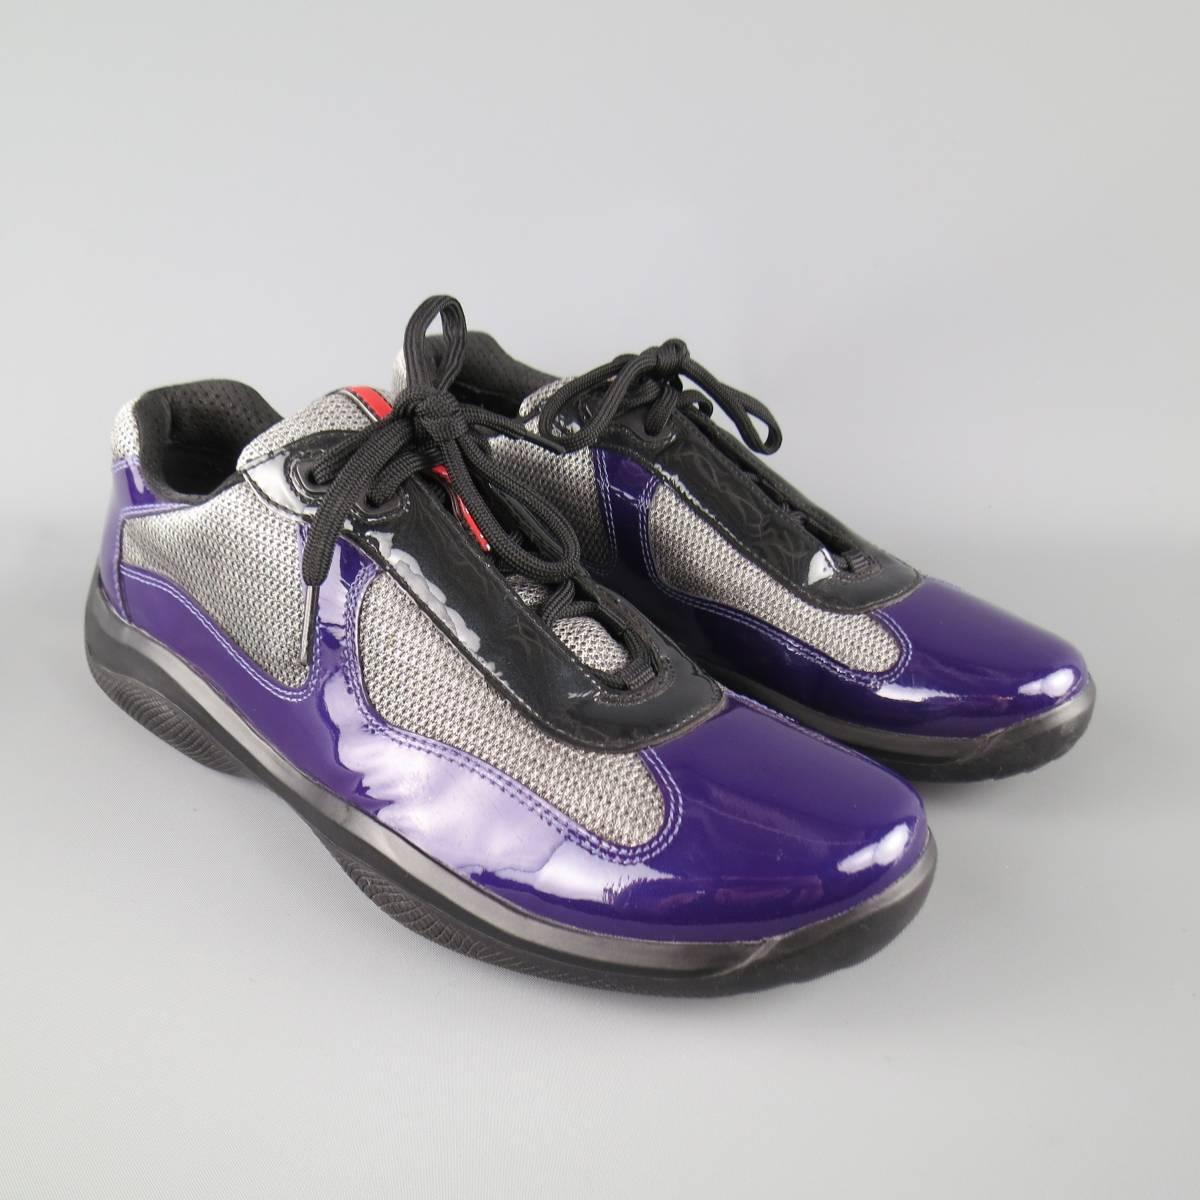 PRADA statement shoes come in a silver padded mesh with purple and black patent leather details and thick black rubber sole.
 
Excellent Pre-Owned Condition.
Marked: UK 8.5
 
Outsole: 11.5 x 4 in.